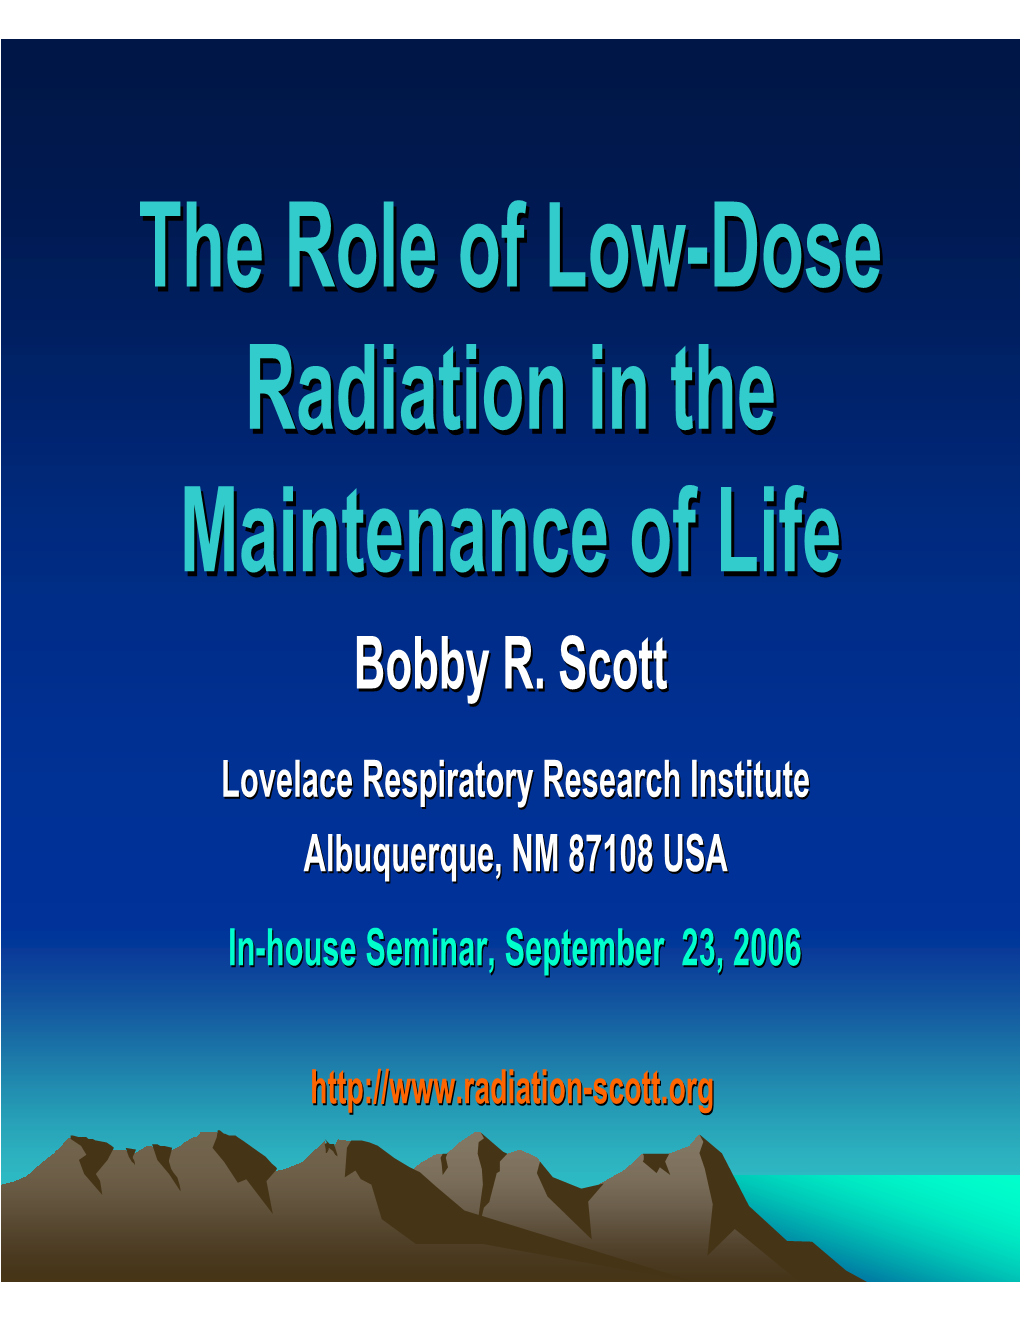 The Role of Low-Dose Radiation in the Maintenance of Life